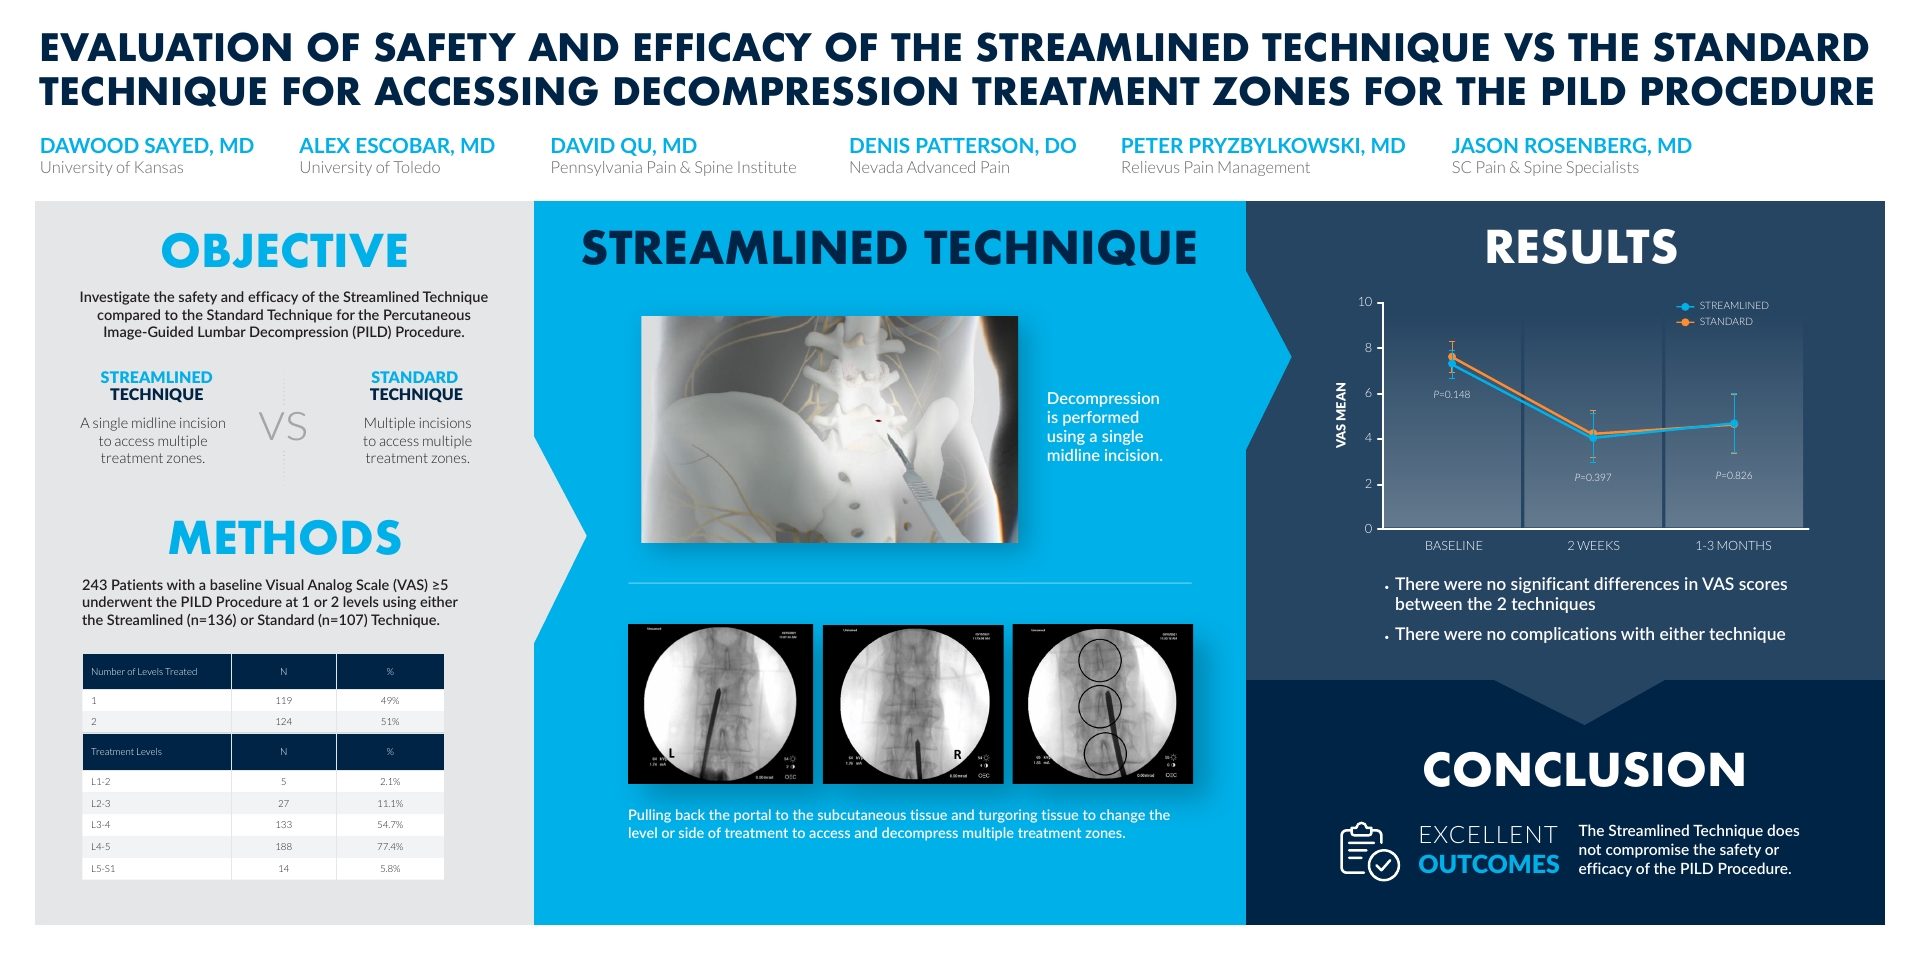 Infographic showing objective, methods and results of Evaluation of Safety and Efficacy of the Streamlined Technique vs the Standard Technique for accessing decompression treatment zones for the PILD procedure